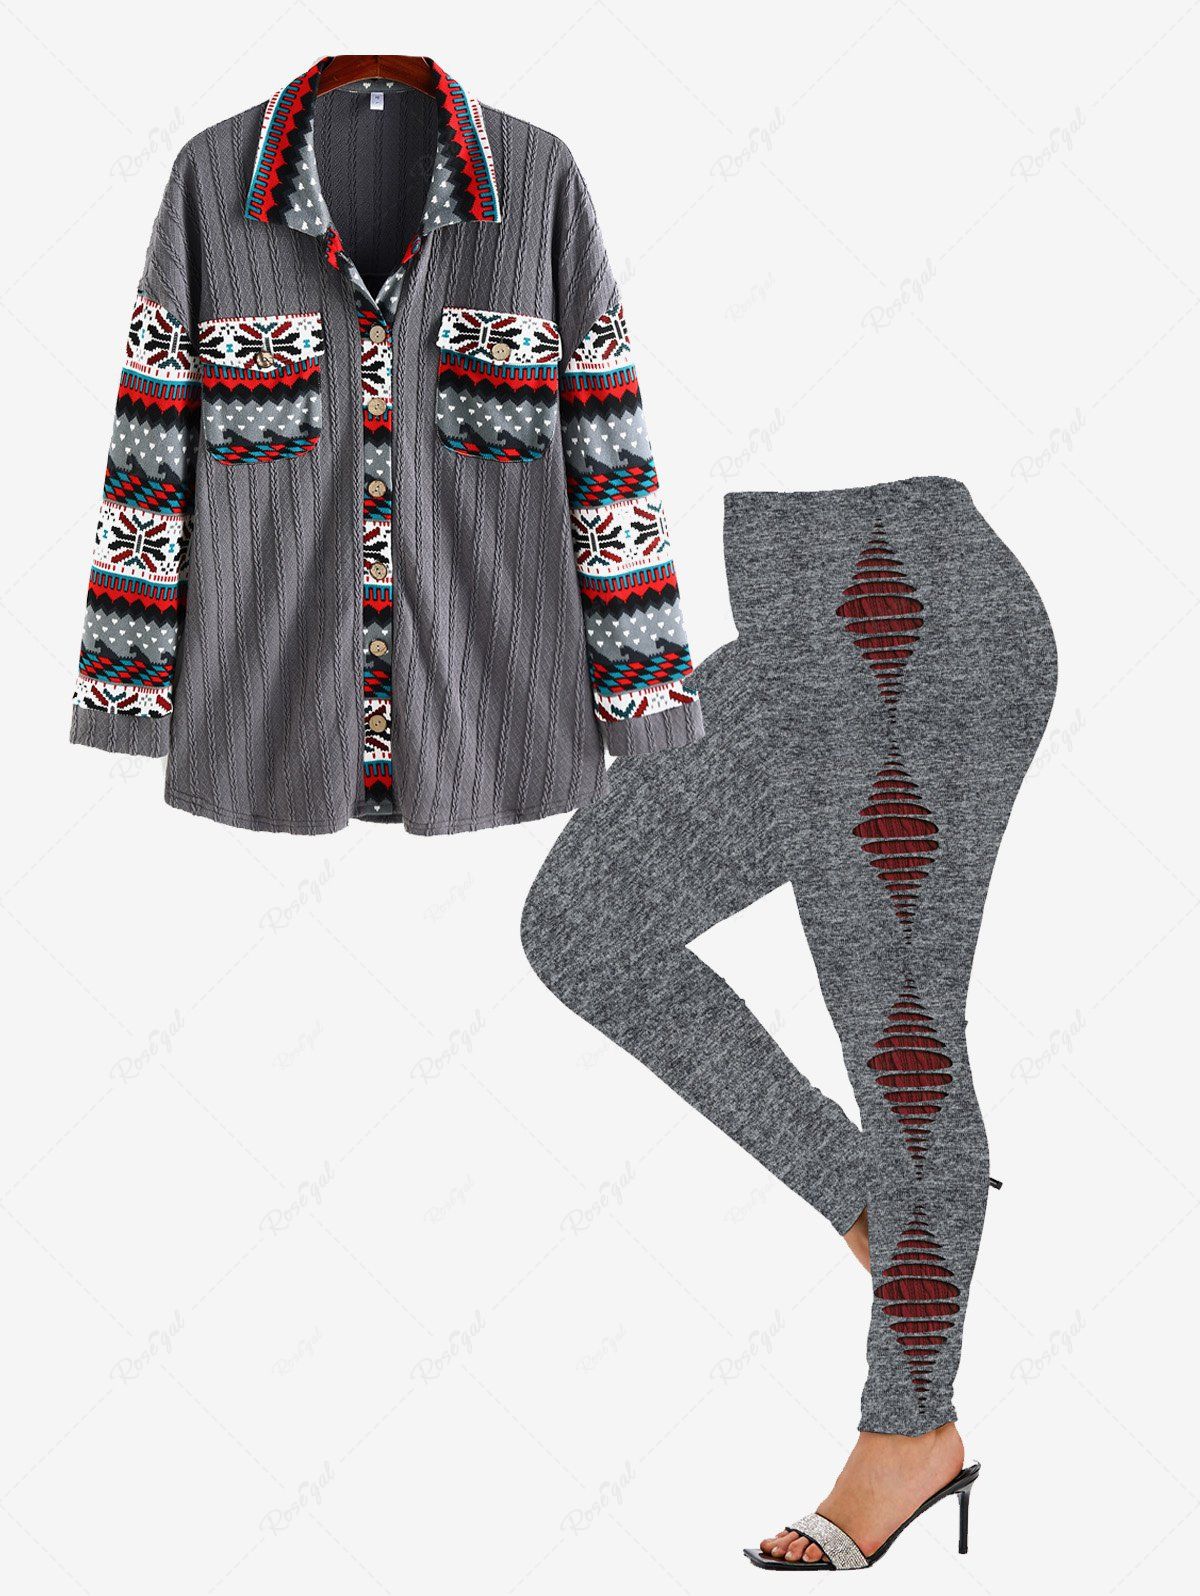 Trendy Christmas Turndown Collar Snowflake Cable Knit Cardigan and High Waist 3D Ripped Print Leggings Plus Size Outerwear Outfit  